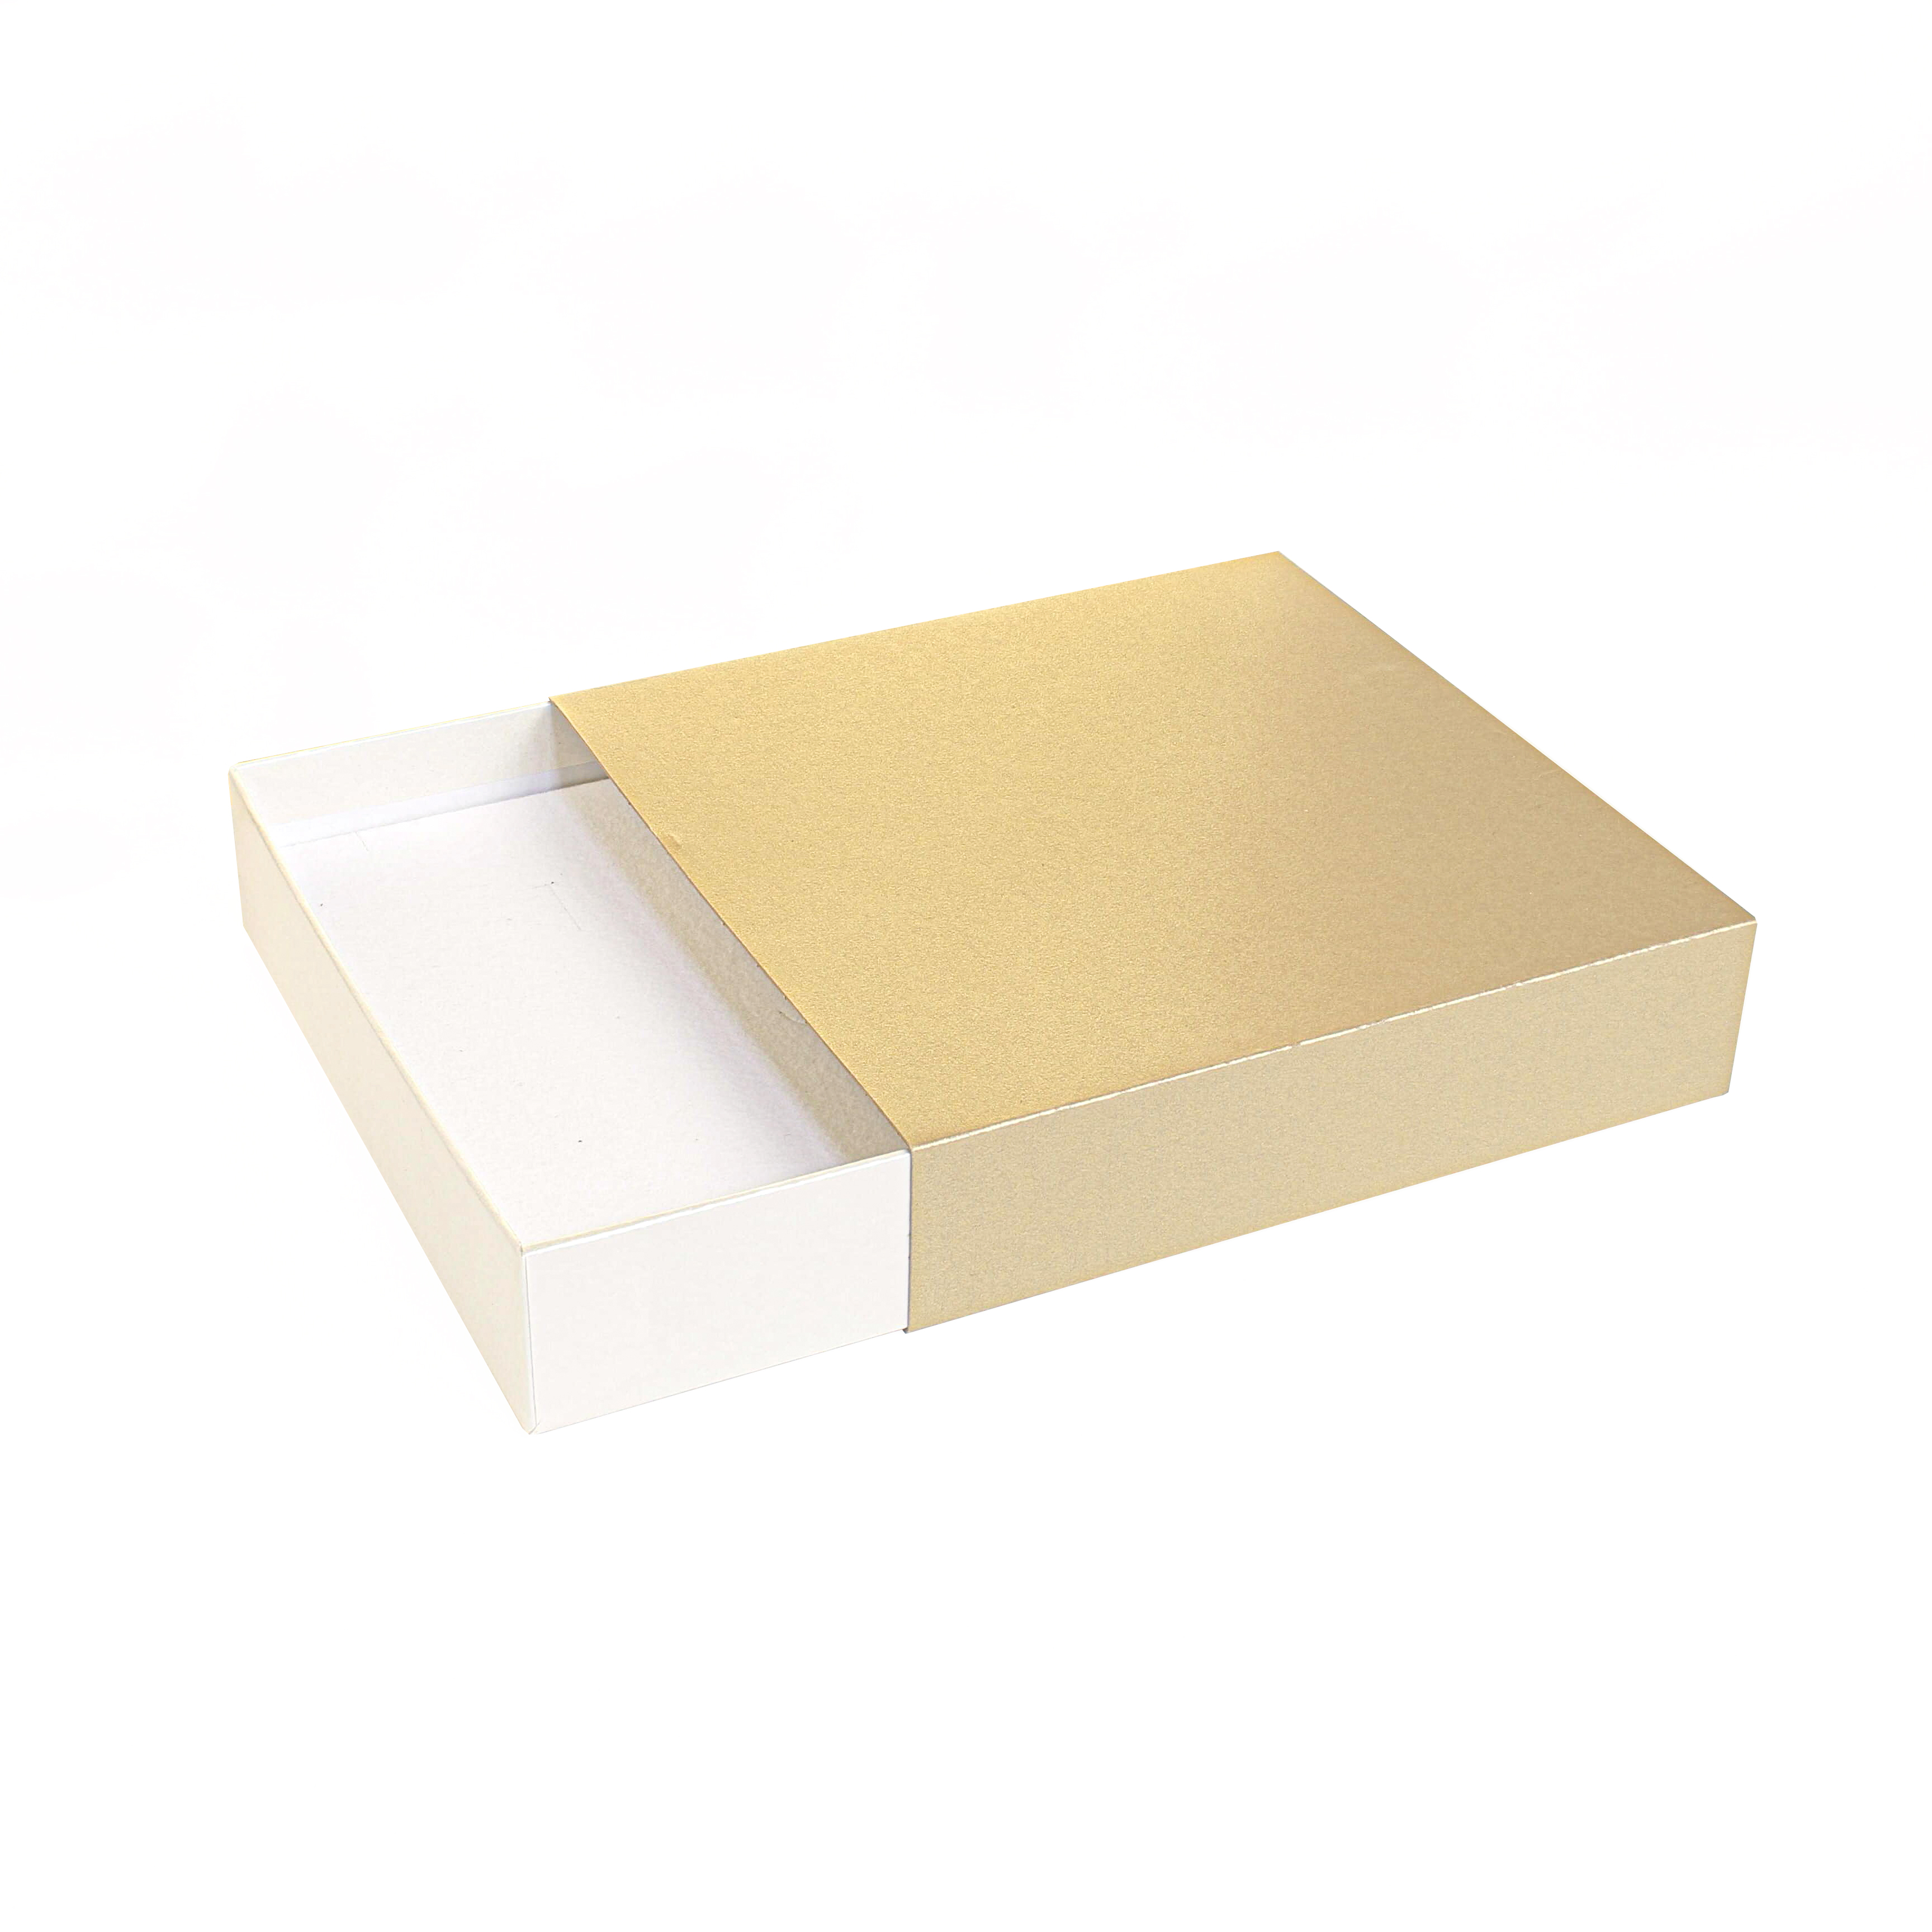 Iridescent gold and cream matchbox style card necklace box